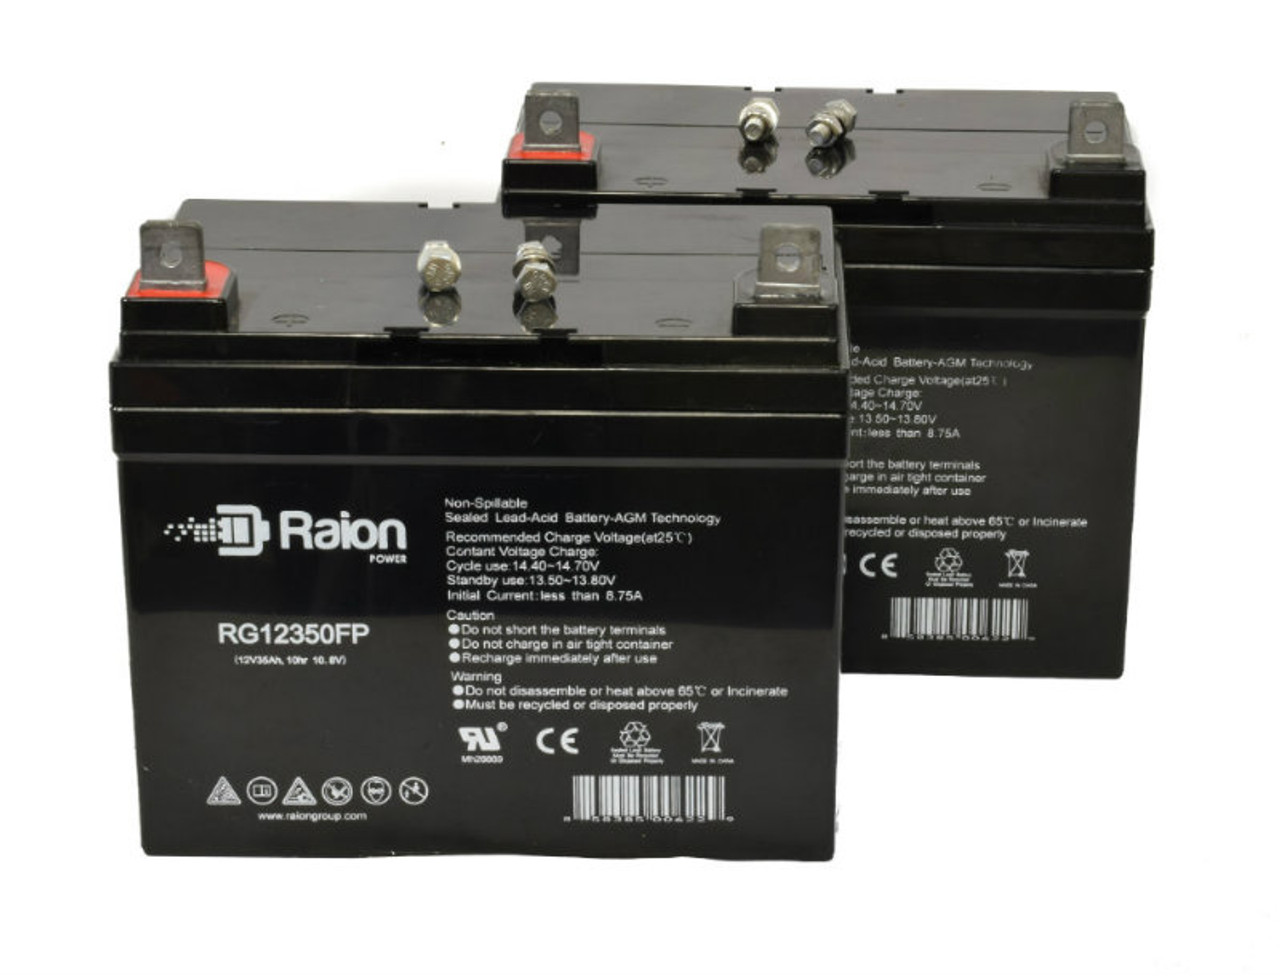 Raion Power Replacement 12V 35Ah Lawn Mower Battery for Ingersol Equipment 6020BH - 2 Pack